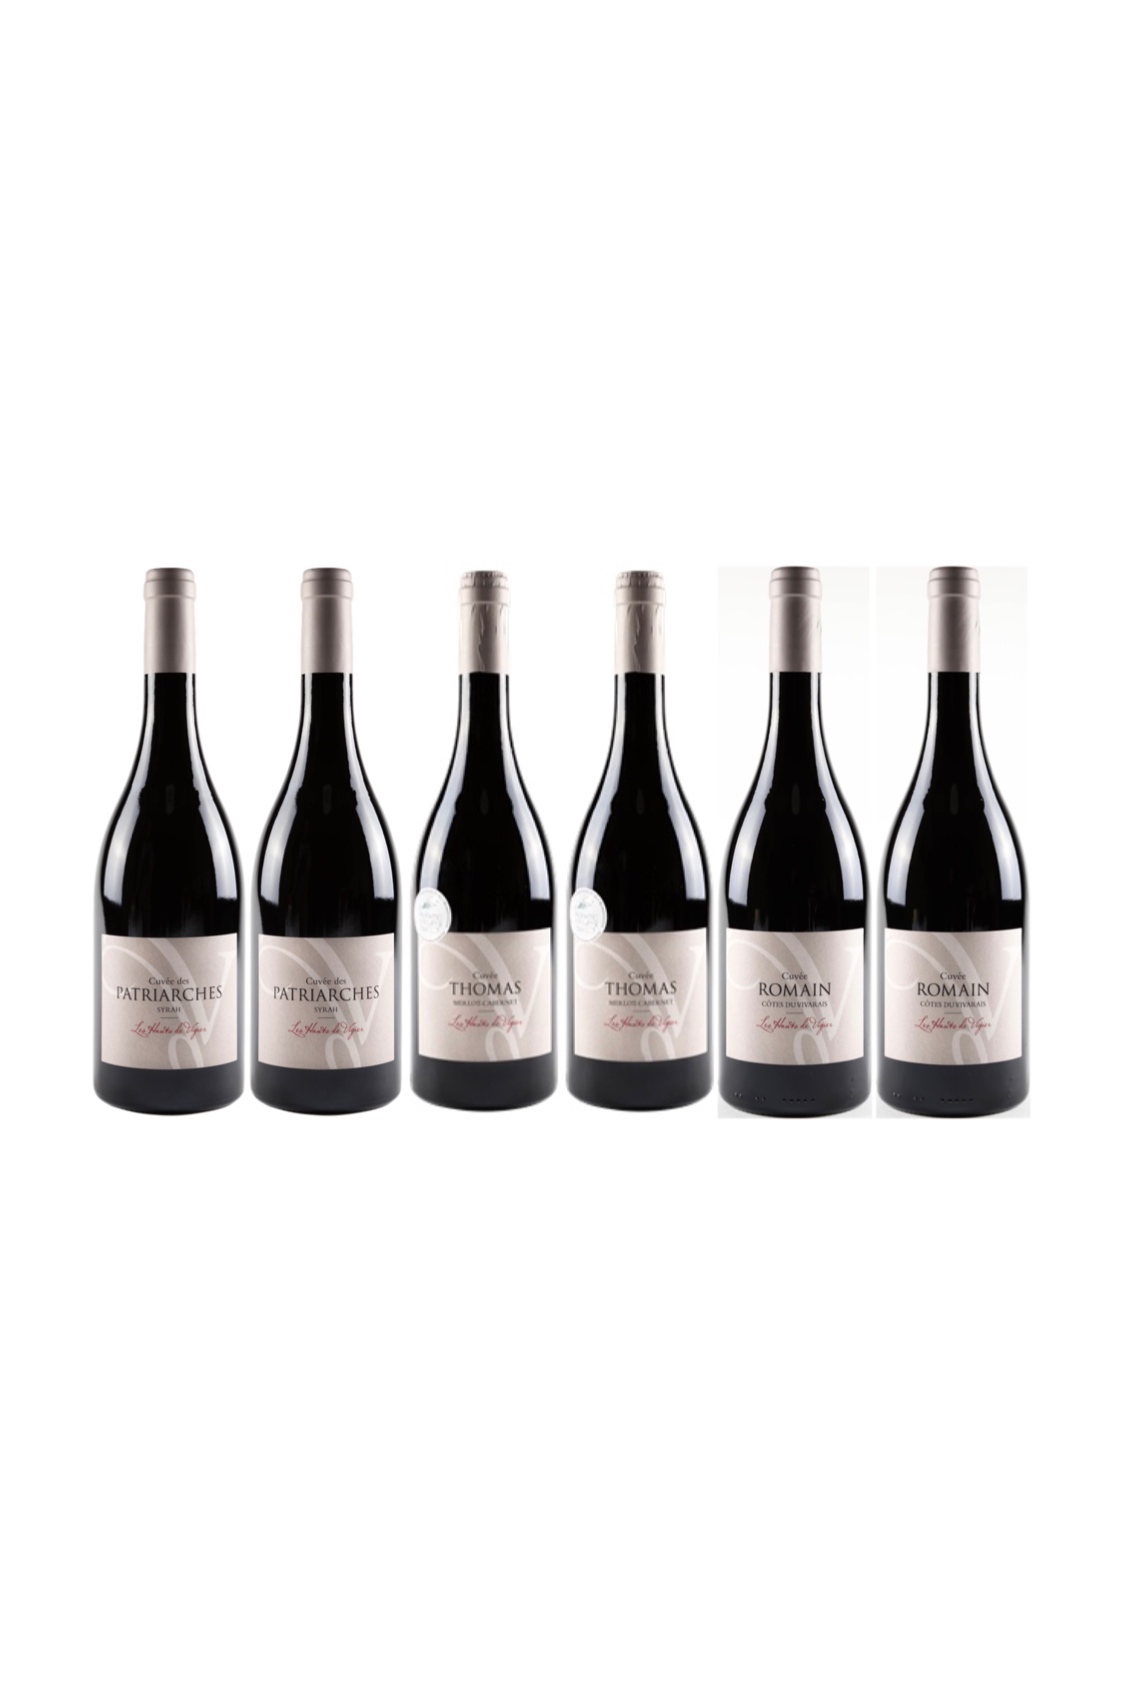 【6 Domaine de Vigier French wine at $168】From Rhone Valley